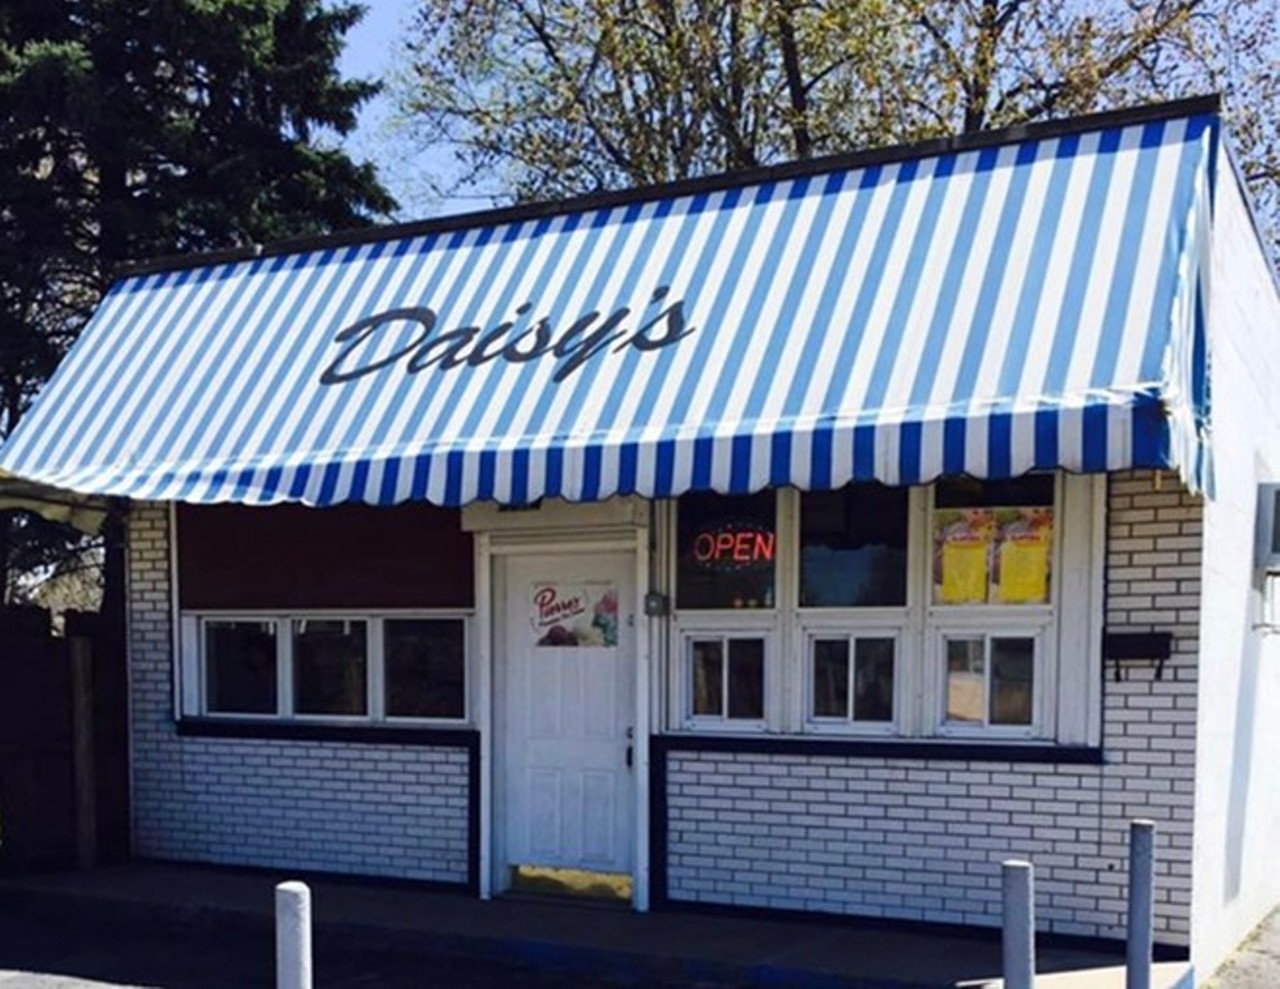  Daisy’s
5614 Fleet Ave., Cleveland
A legend in Slavic Village for four decades, Daisy’s in Slavic Village recently reopened after a five-year hiatus. Partners Brittany Bissell and Chris Hoke offer a combination of hard pack and soft serve ice creams, brownie sundaes, banana splits, milkshakes and floats. They serve Toft’s ice cream from Sandusky (“Ohio’s oldest dairy”), as well as a small selection of hot foods starring hot dogs and traditional Polish boys, with kielbasa, fries, coleslaw and barbecue sauce.